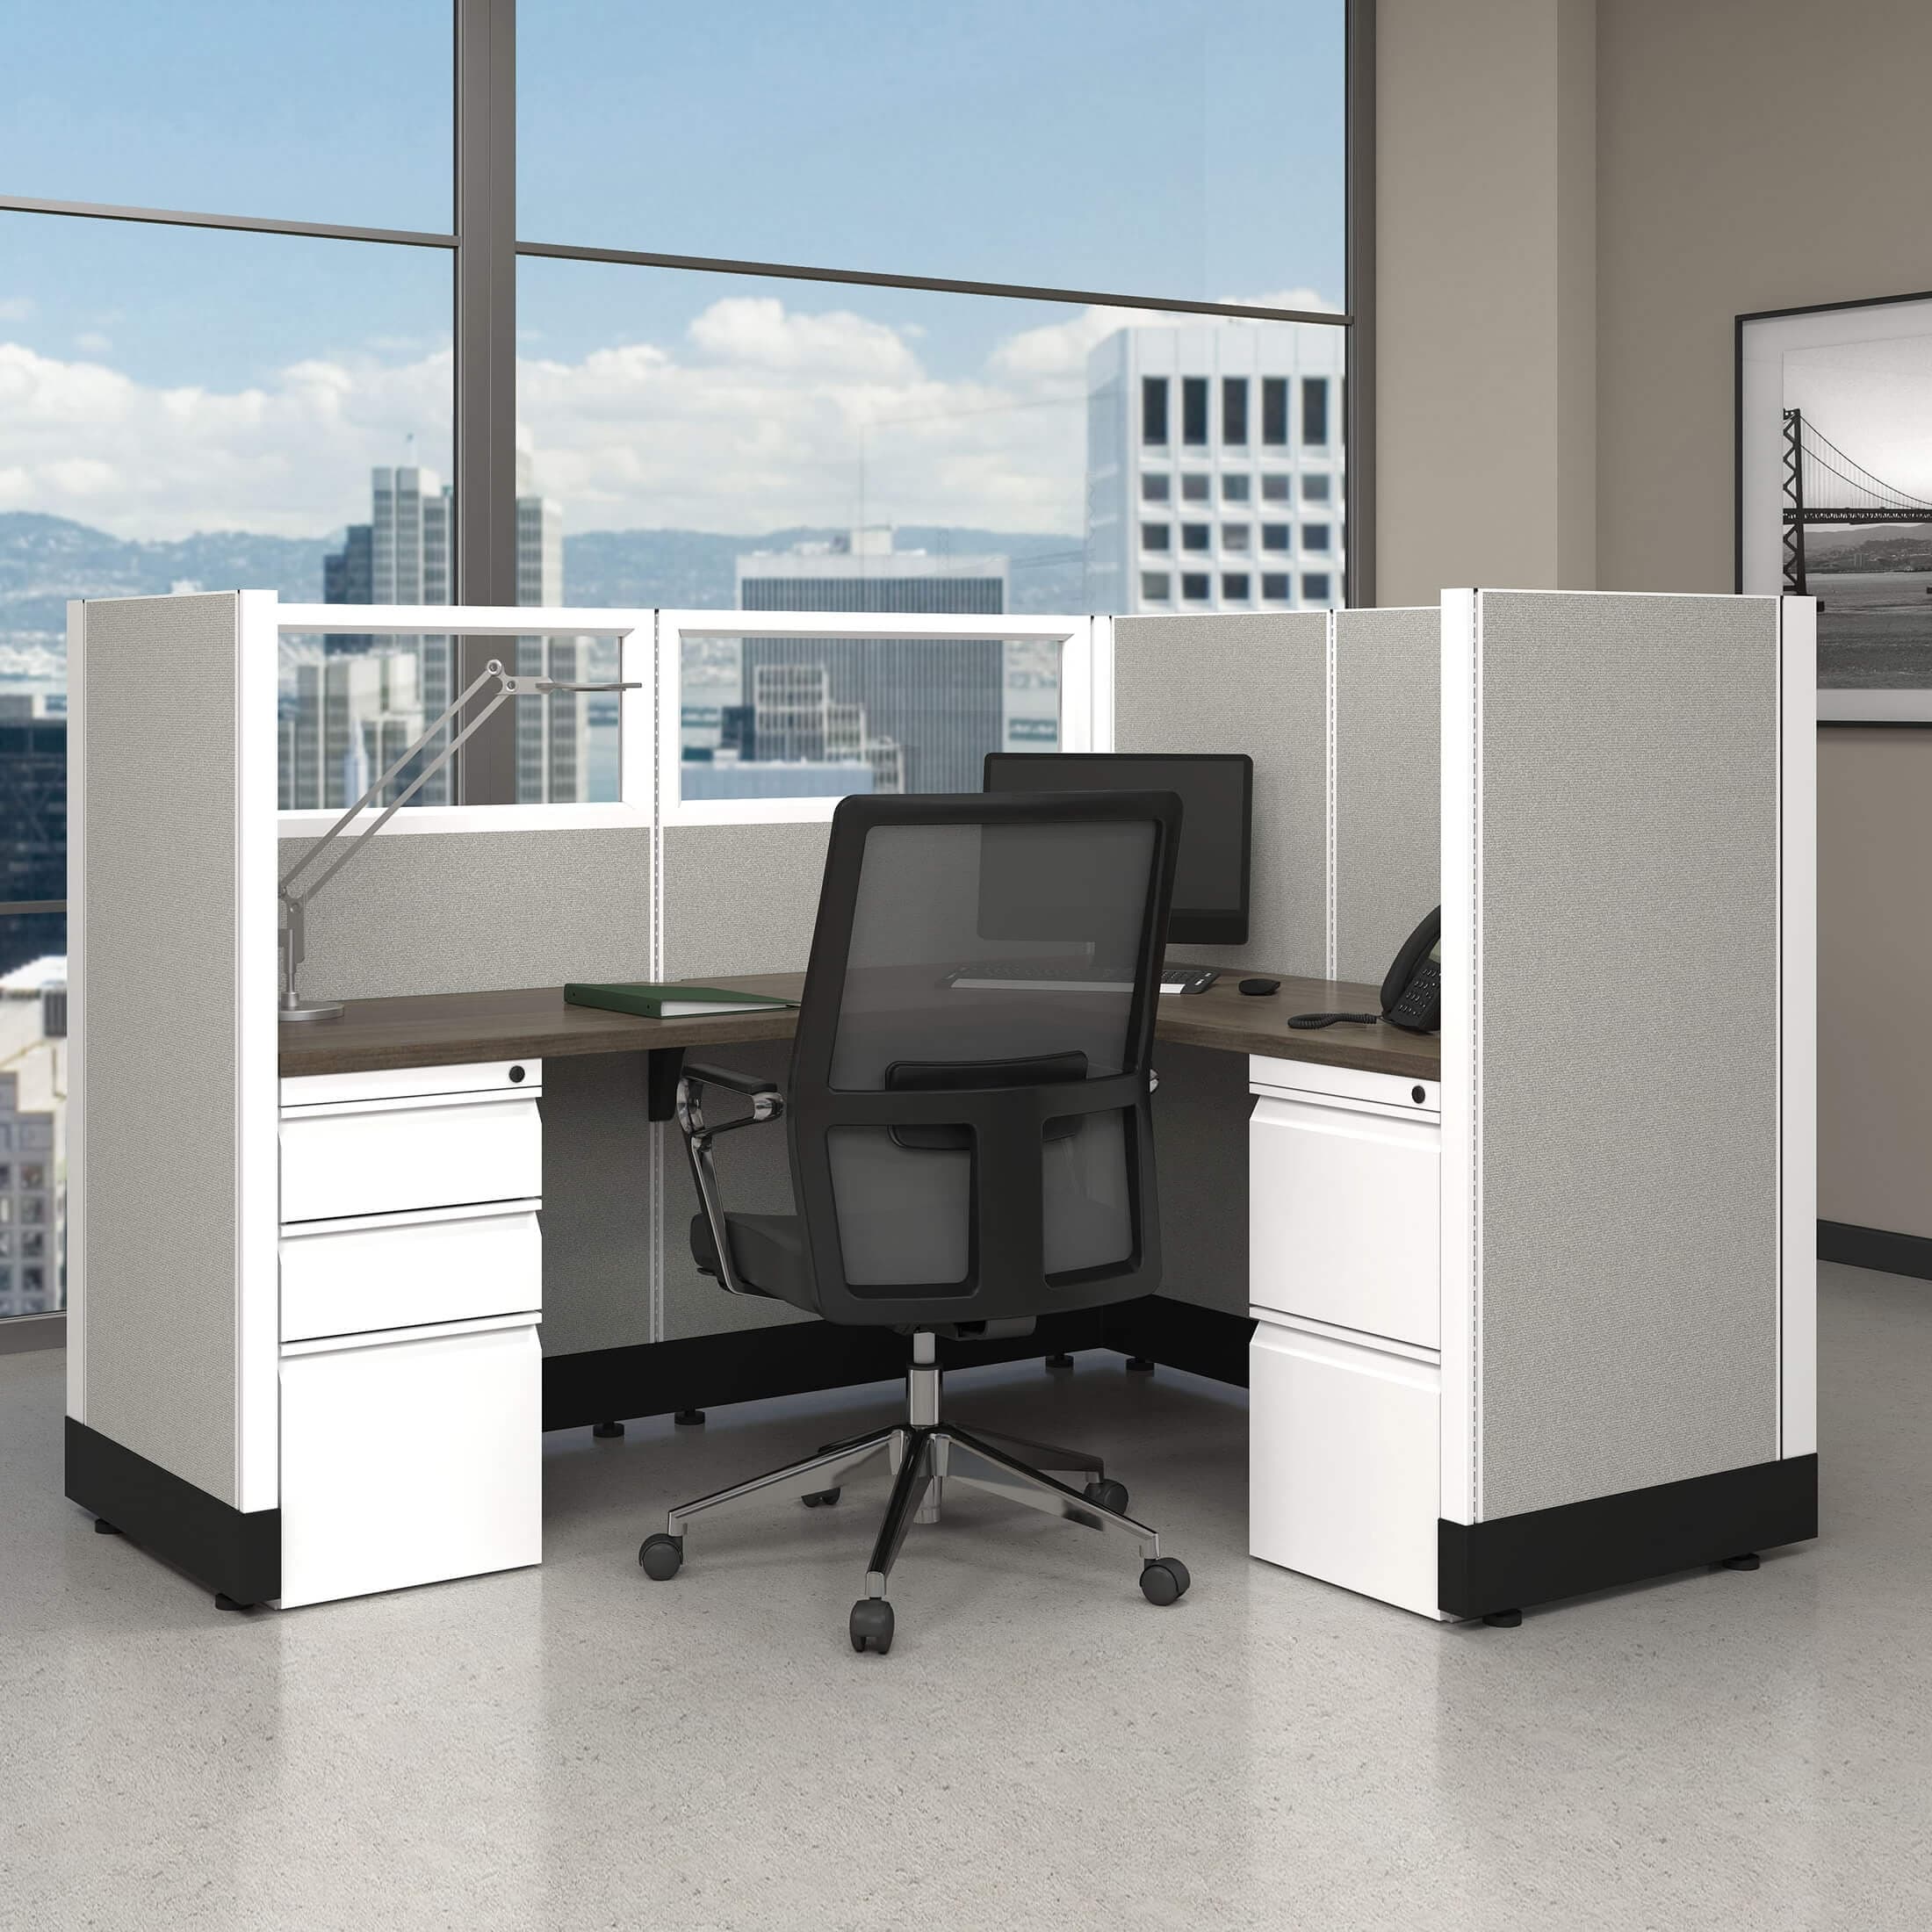 Modular Office Furniture Systems 53H Powered Cubicles - Overstock - 29177166